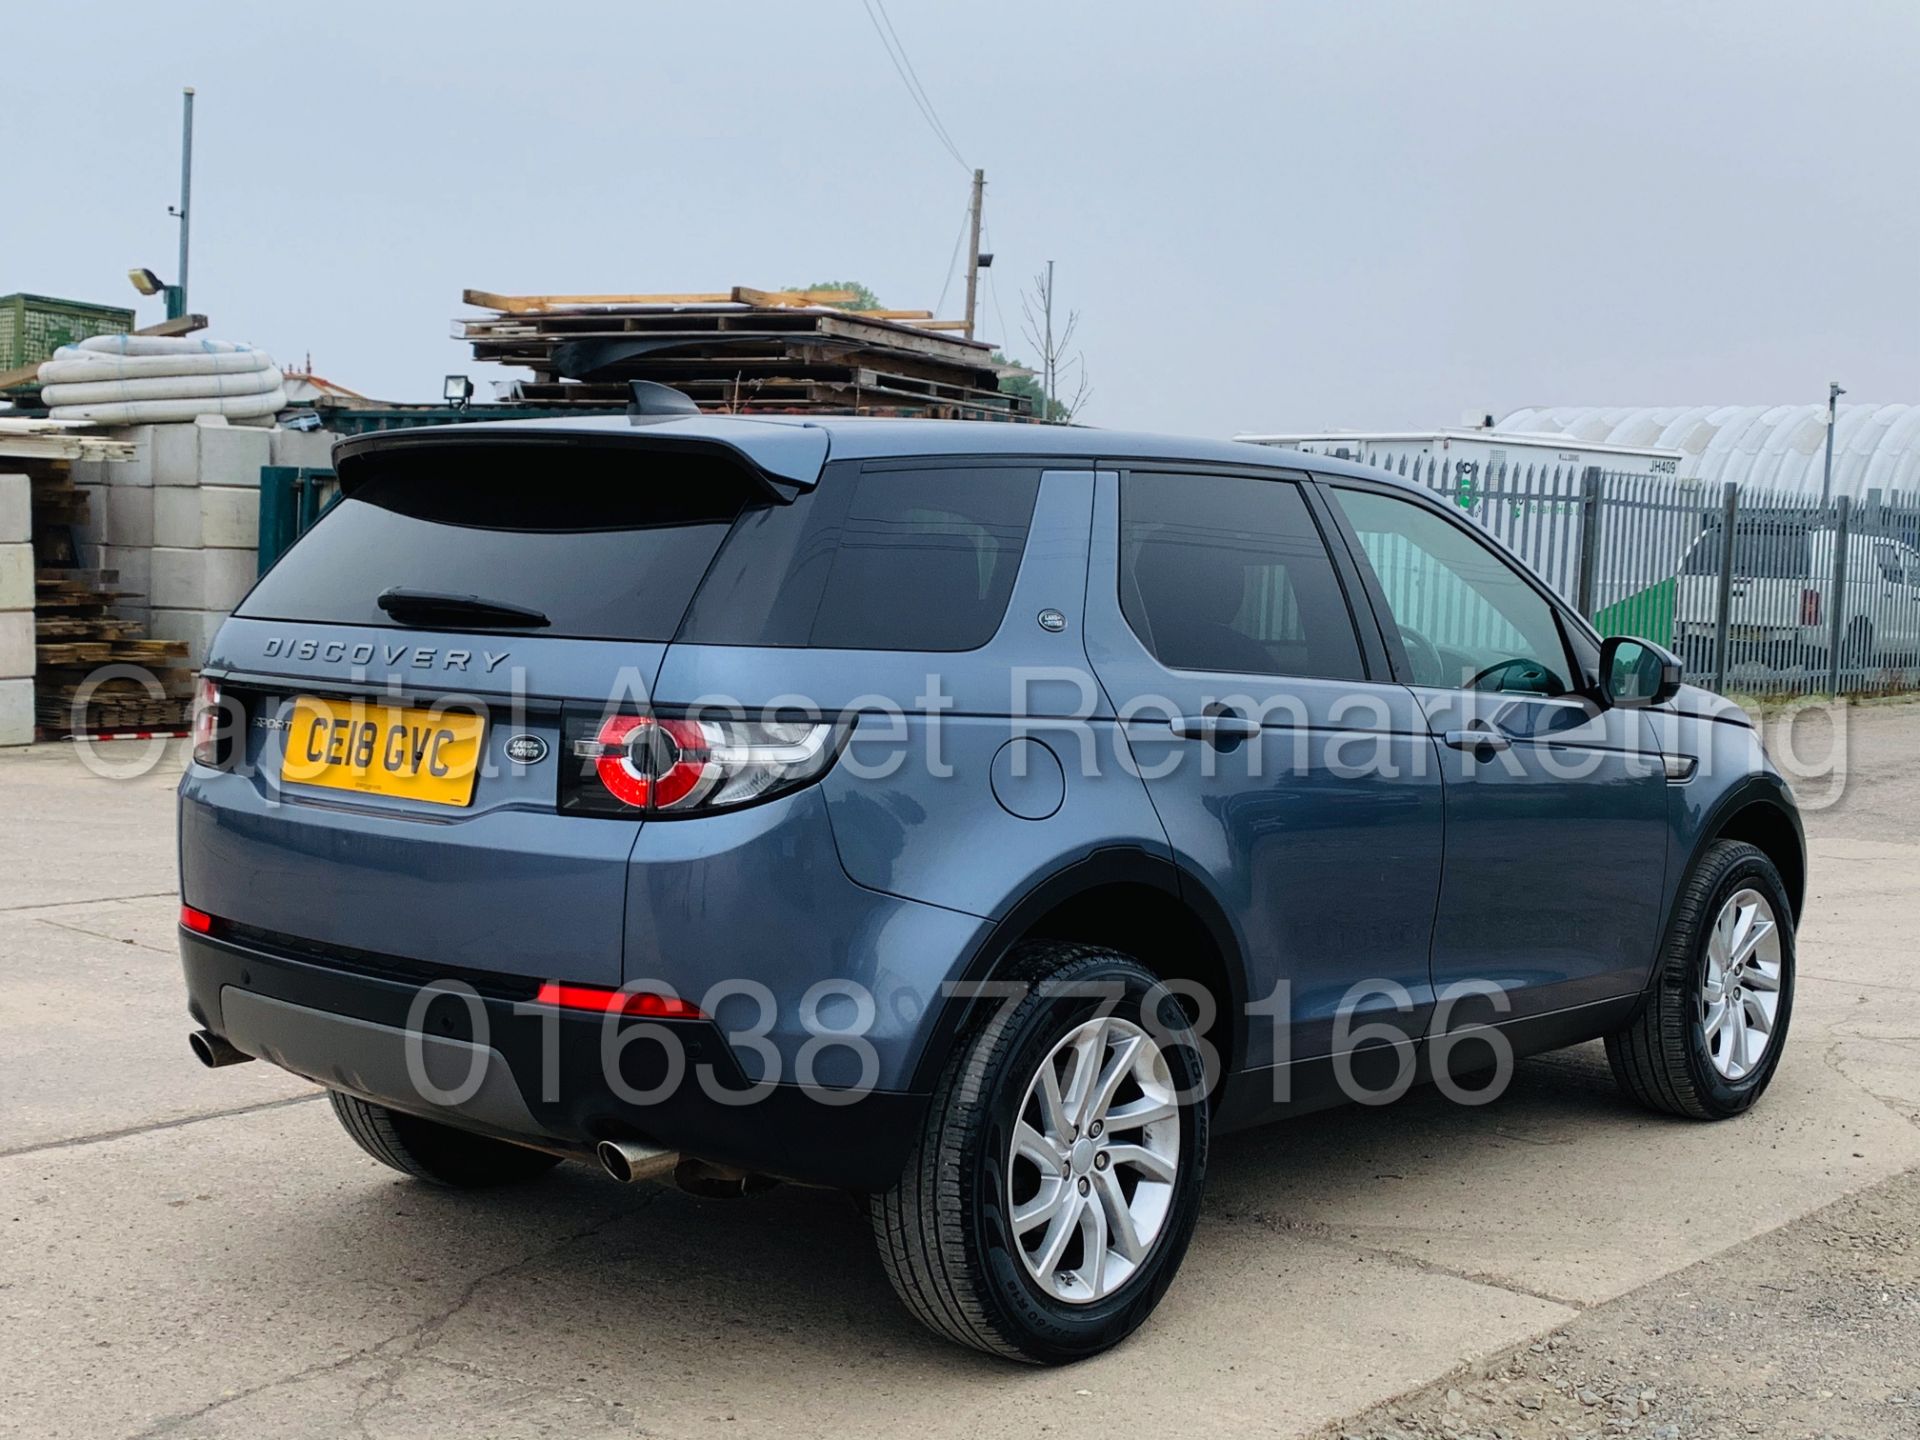 (On Sale) LAND ROVER DISCOVERY SPORT *SE TECH* 7 SEATER SUV (2018) '2.0 TD4 - STOP/START' *SAT NAV* - Image 13 of 59